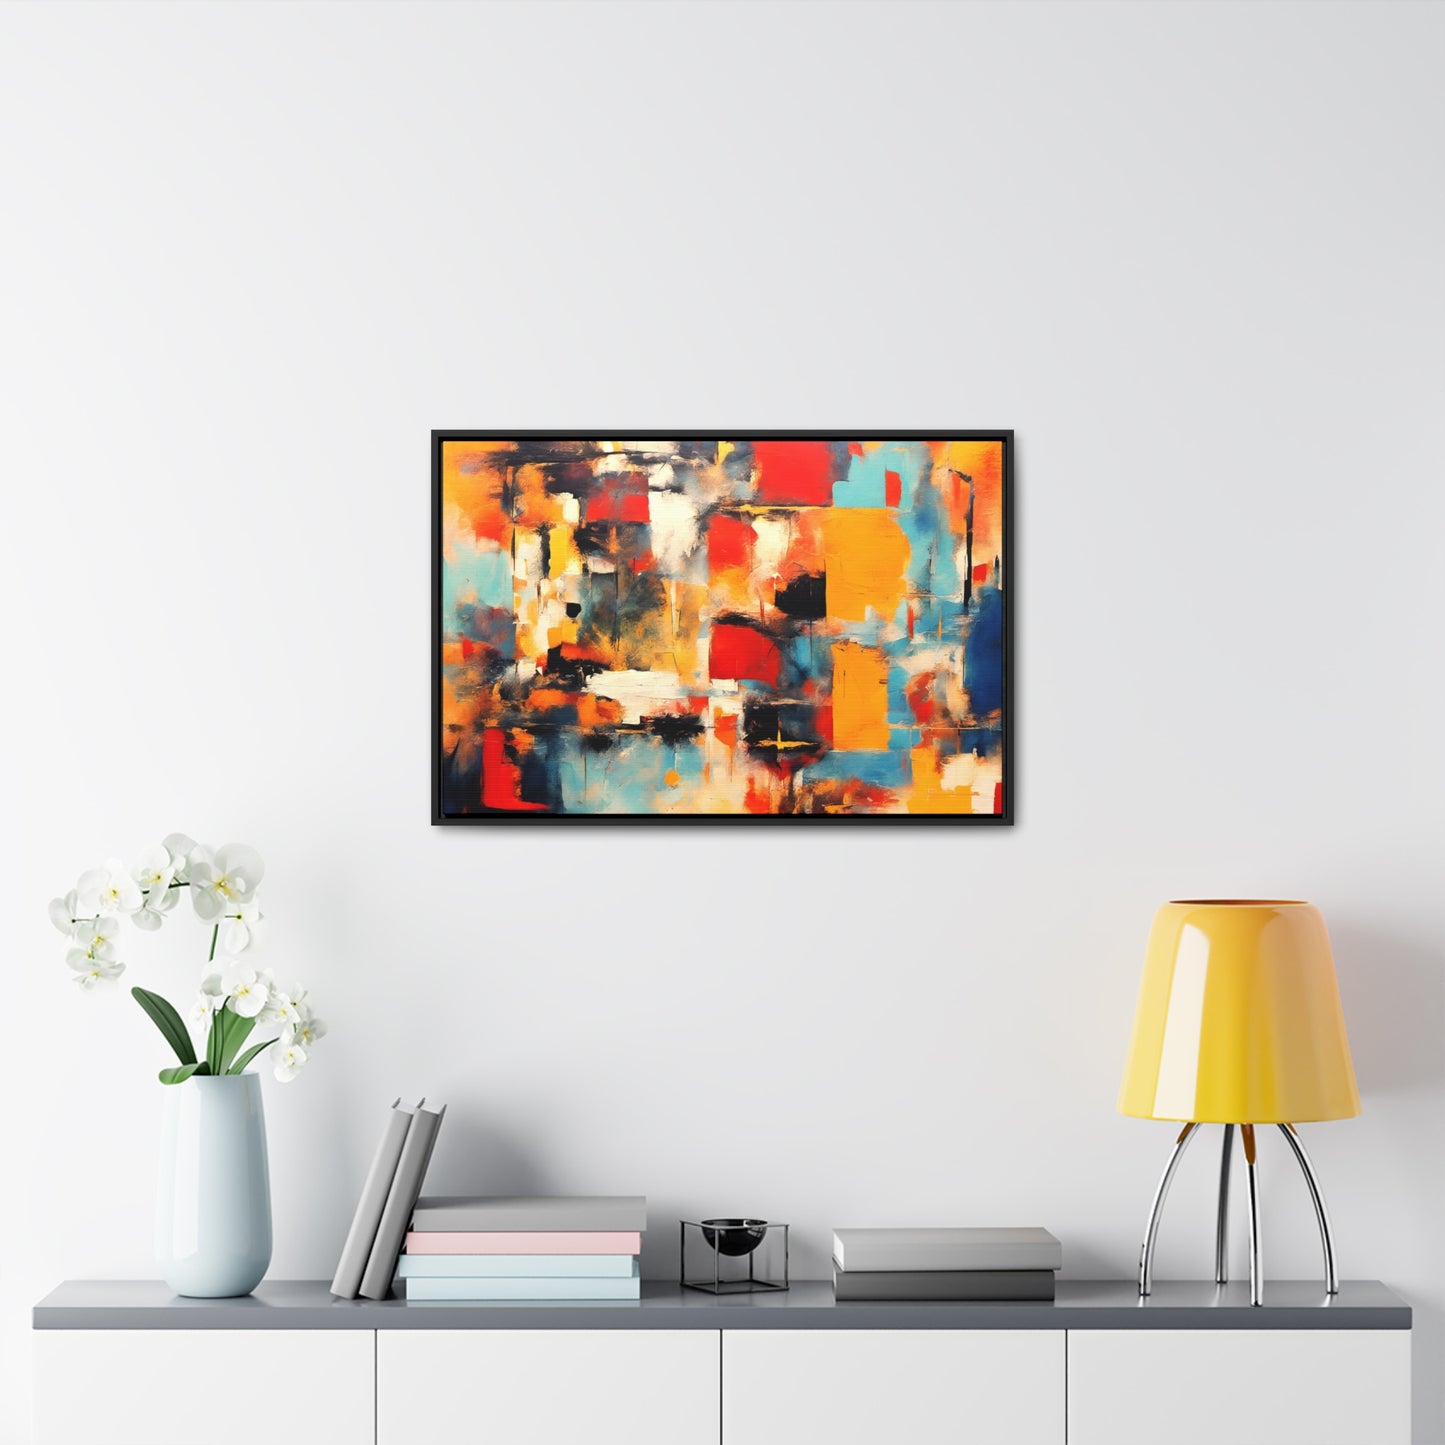 Modern Art Wall Print Reflection of Multicolor Patches in a Floating Frame 30x20